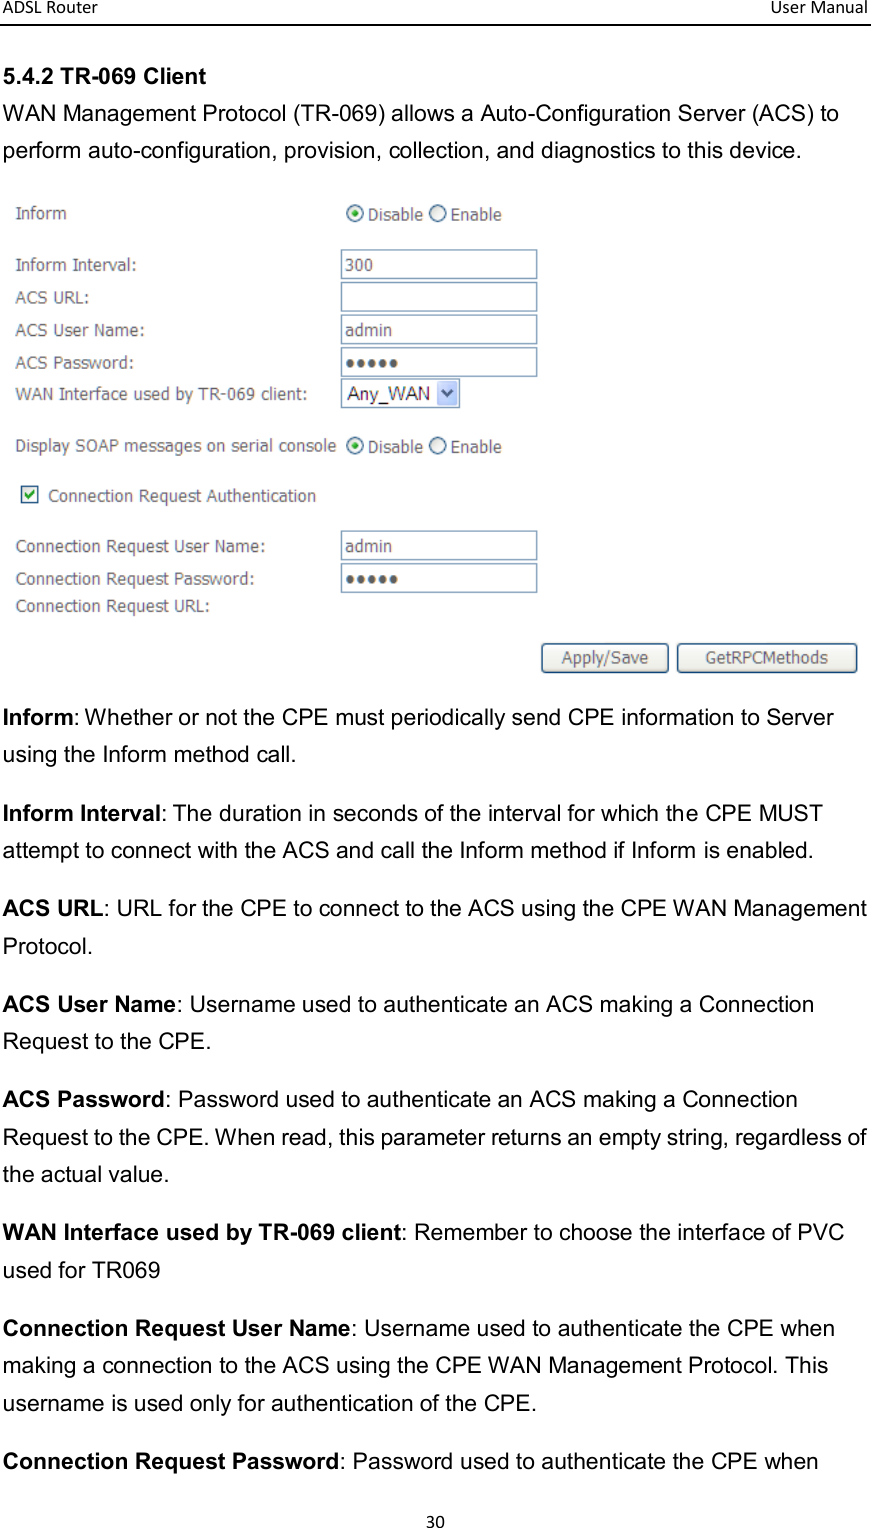 ADSL Router       User Manual 30 5.4.2 TR-069 Client WAN Management Protocol (TR-069) allows a Auto-Configuration Server (ACS) to perform auto-configuration, provision, collection, and diagnostics to this device.  Inform: Whether or not the CPE must periodically send CPE information to Server using the Inform method call. Inform Interval: The duration in seconds of the interval for which the CPE MUST attempt to connect with the ACS and call the Inform method if Inform is enabled. ACS URL: URL for the CPE to connect to the ACS using the CPE WAN Management Protocol.   ACS User Name: Username used to authenticate an ACS making a Connection Request to the CPE. ACS Password: Password used to authenticate an ACS making a Connection Request to the CPE. When read, this parameter returns an empty string, regardless of the actual value. WAN Interface used by TR-069 client: Remember to choose the interface of PVC used for TR069 Connection Request User Name: Username used to authenticate the CPE when making a connection to the ACS using the CPE WAN Management Protocol. This username is used only for authentication of the CPE.   Connection Request Password: Password used to authenticate the CPE when 